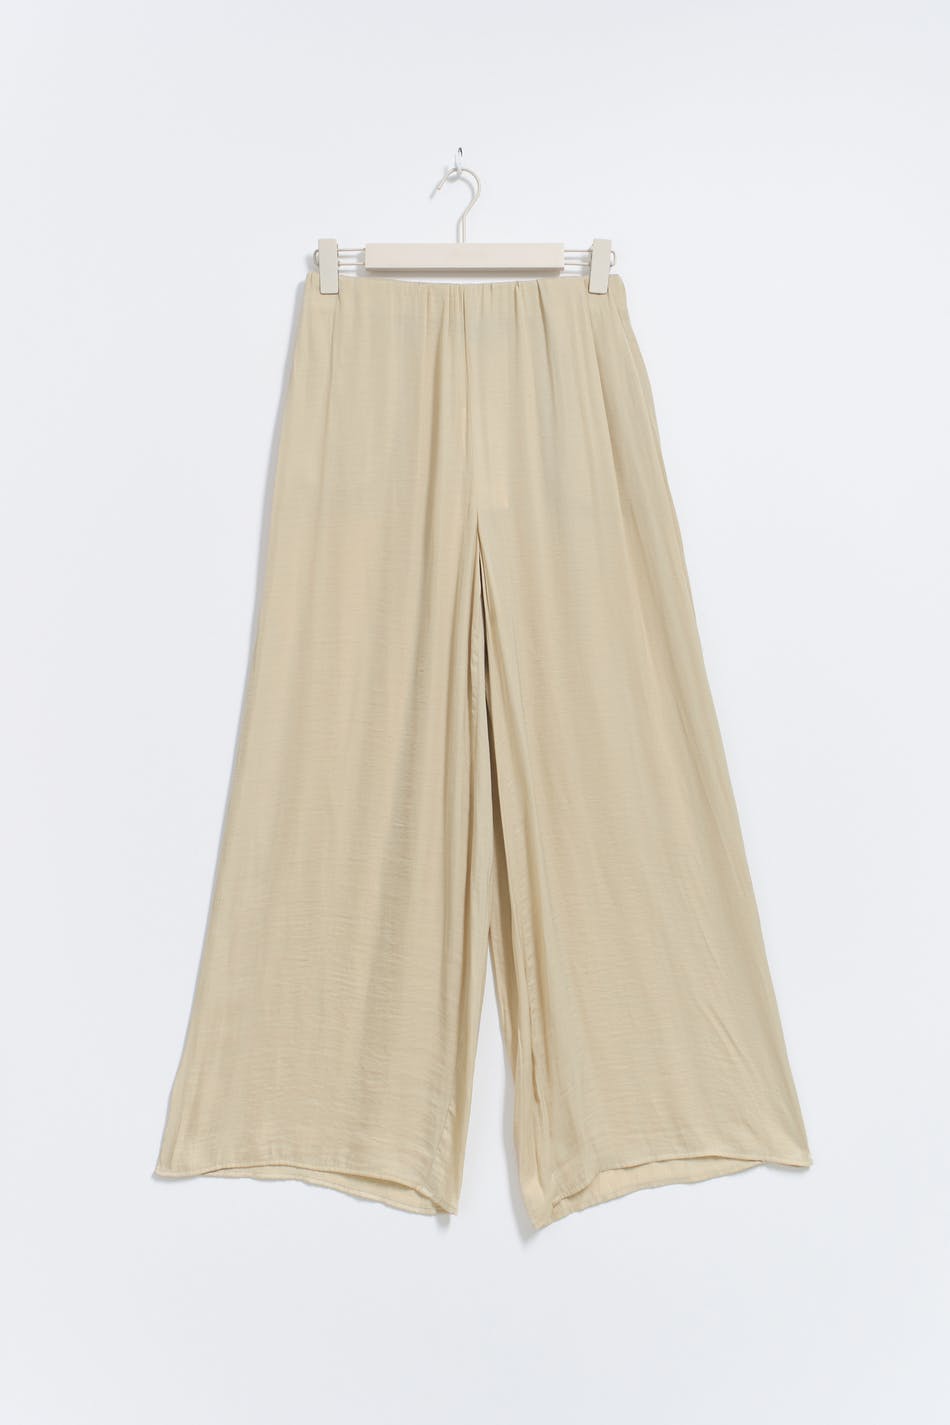  Gina Tricot- Tall wide satin trousers - Weite hosen- Beige - 42- Female